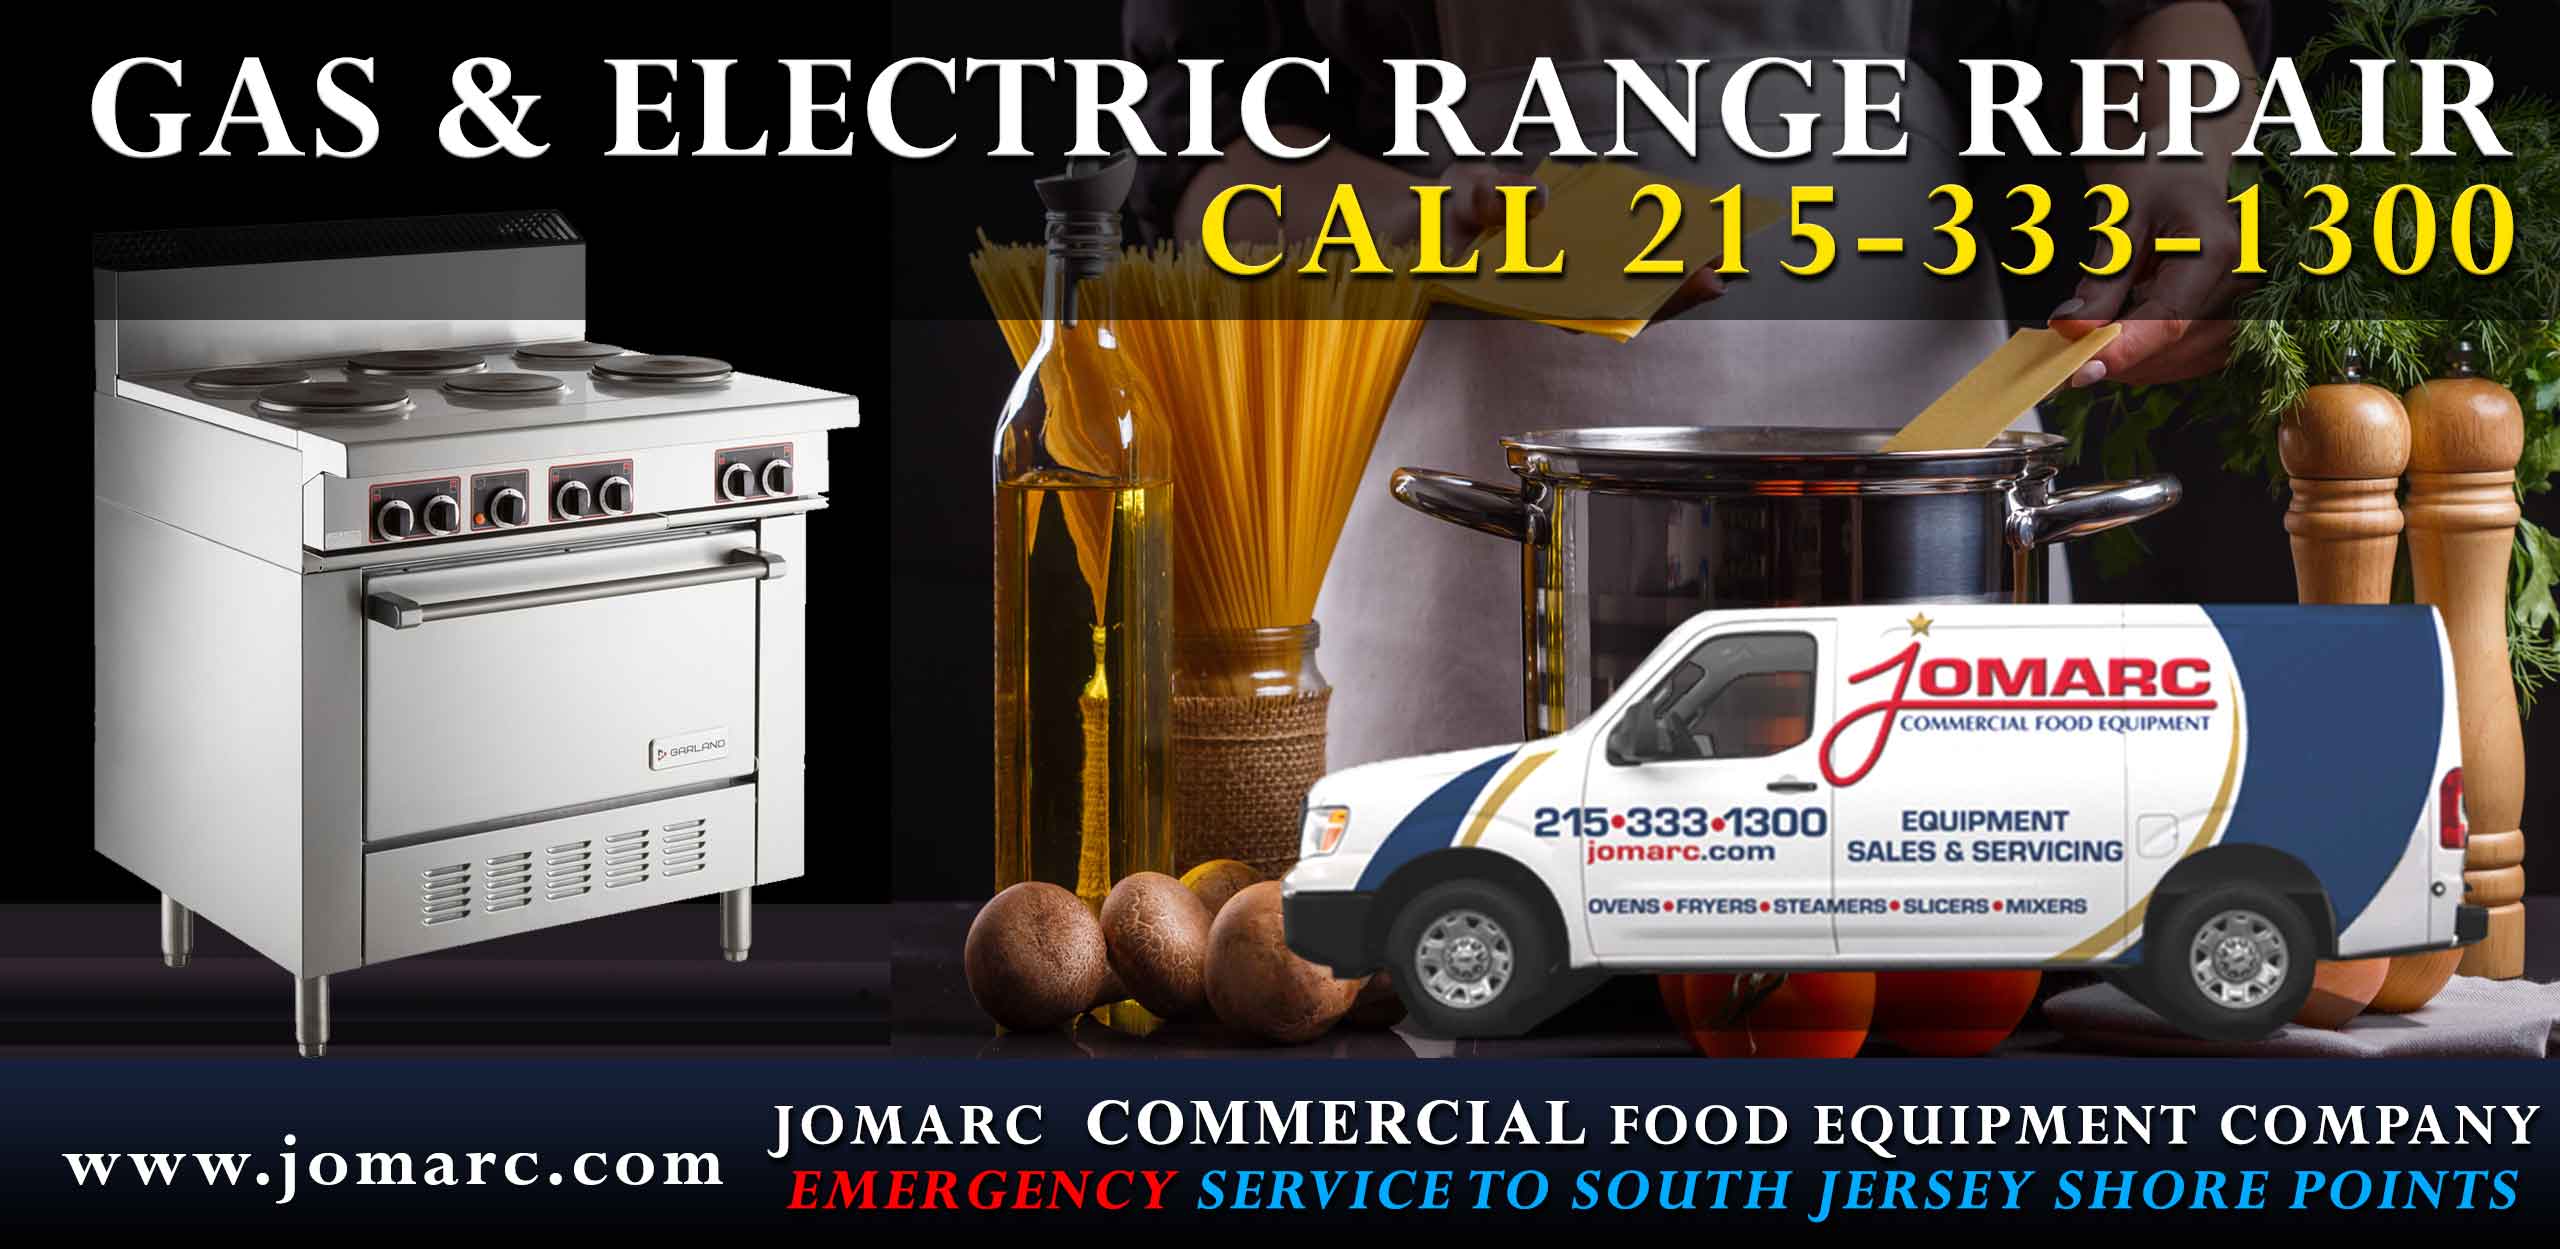 Commercial Range Repair Bucks County Philadelphia Jomarc repairs all types of Standard Duty/Heavy Duty Gas Electric , Countertop Gas Electric  with or without Griddle, Induction Ranges and Cookers, Portable Buffet Drop-In, Stock Pot, Wok, Mongolian BBQ Ranges/ Step-Up Countertop Gas  